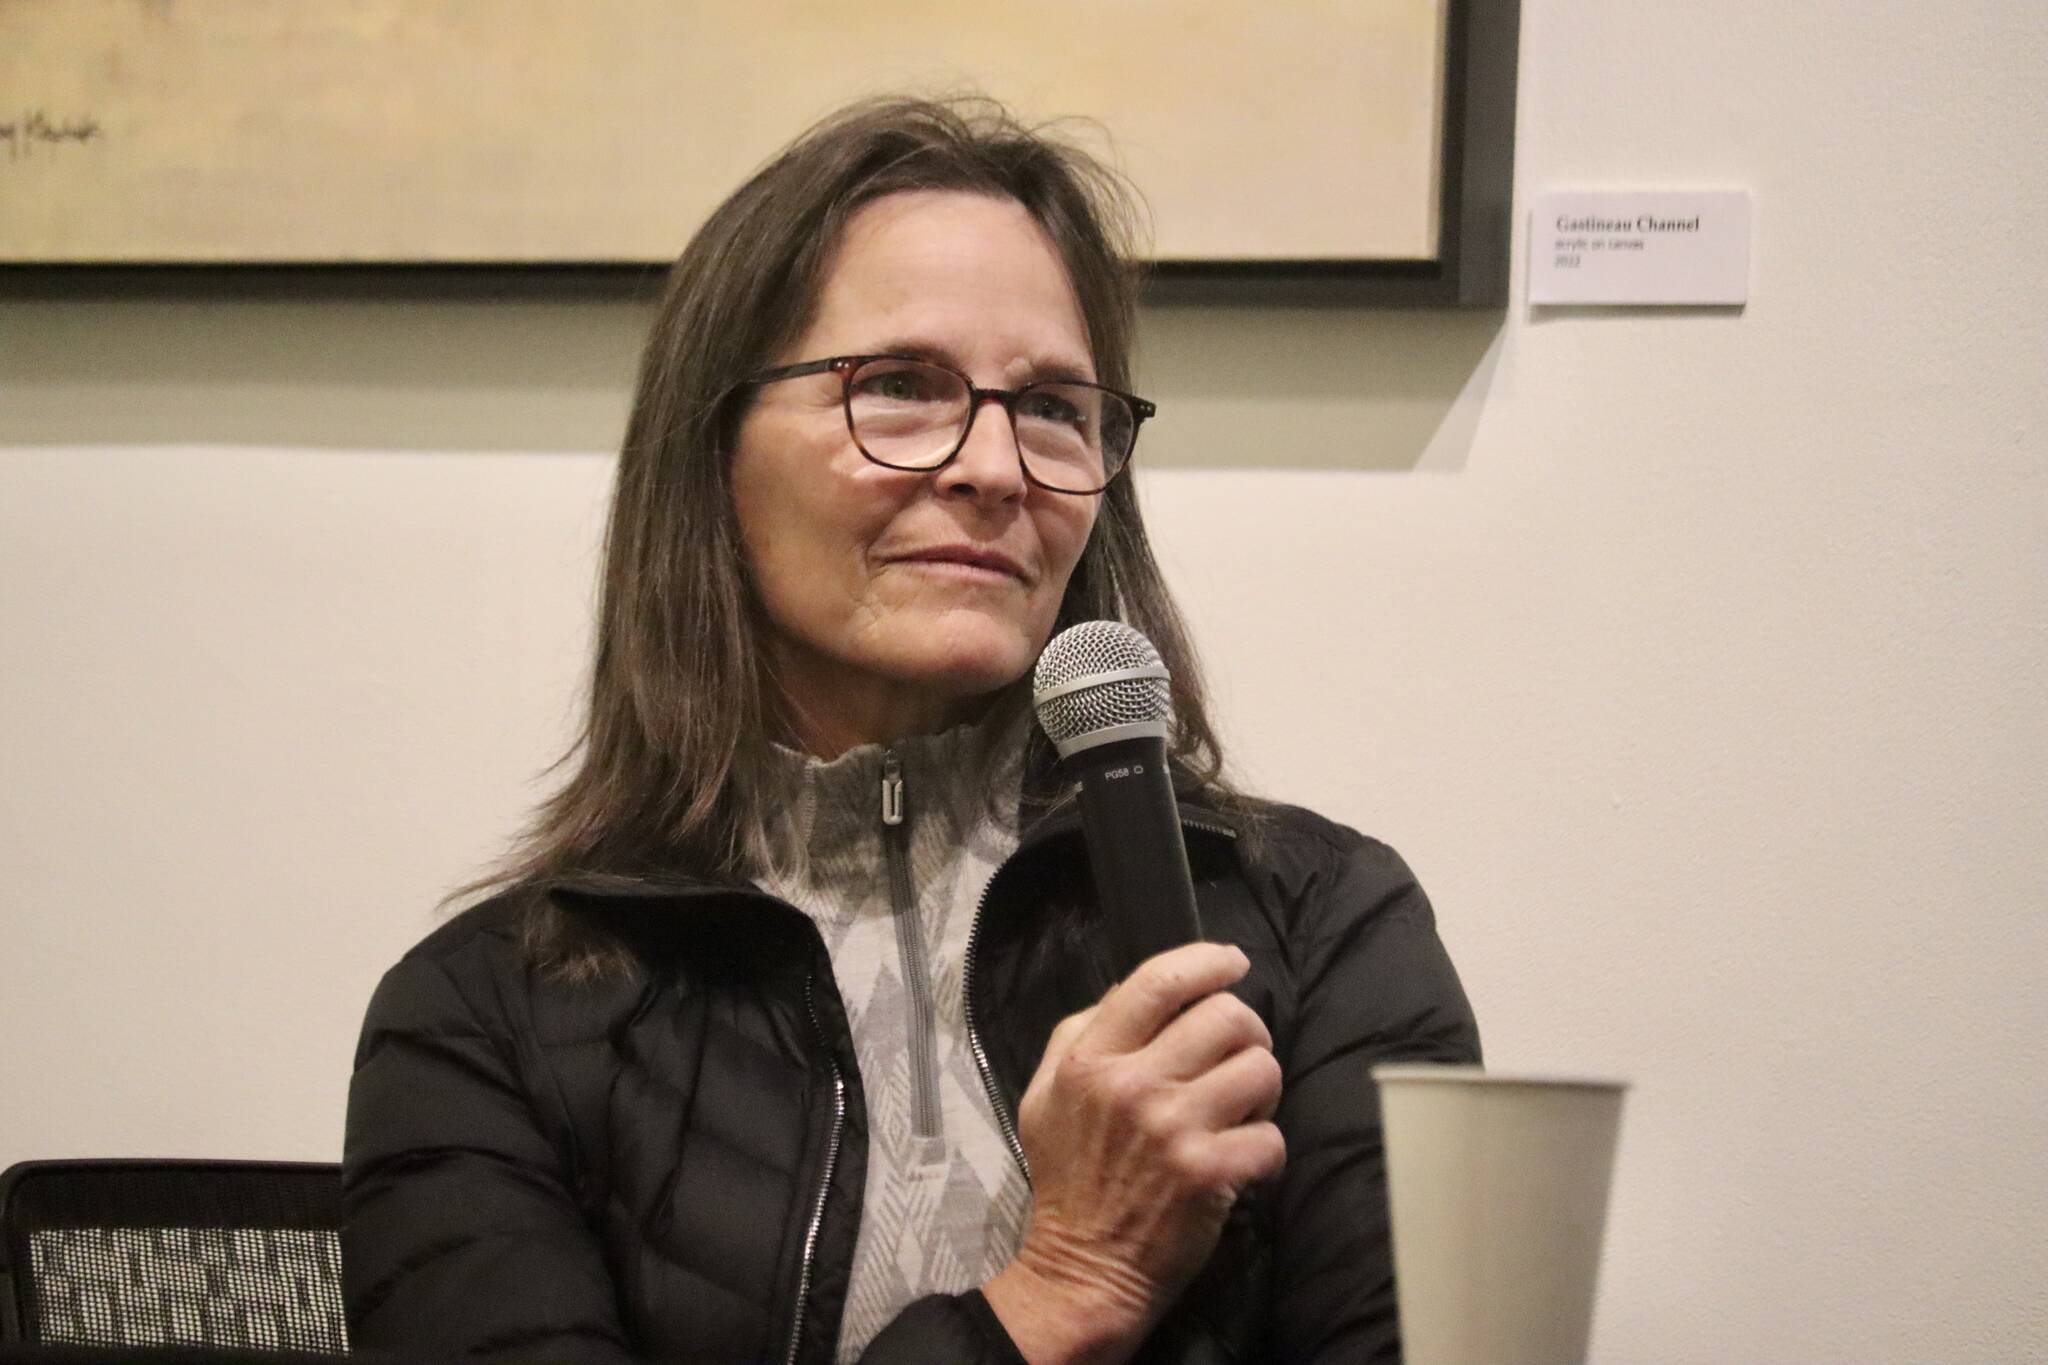 Artist Kerry Kirkpatrick answers questions about her latest exhibition “Capturing the Light at a recent Q&A held at the Juneau-Douglas City Museum on Saturday. (Jonson Kuhn / Juneau Empire)